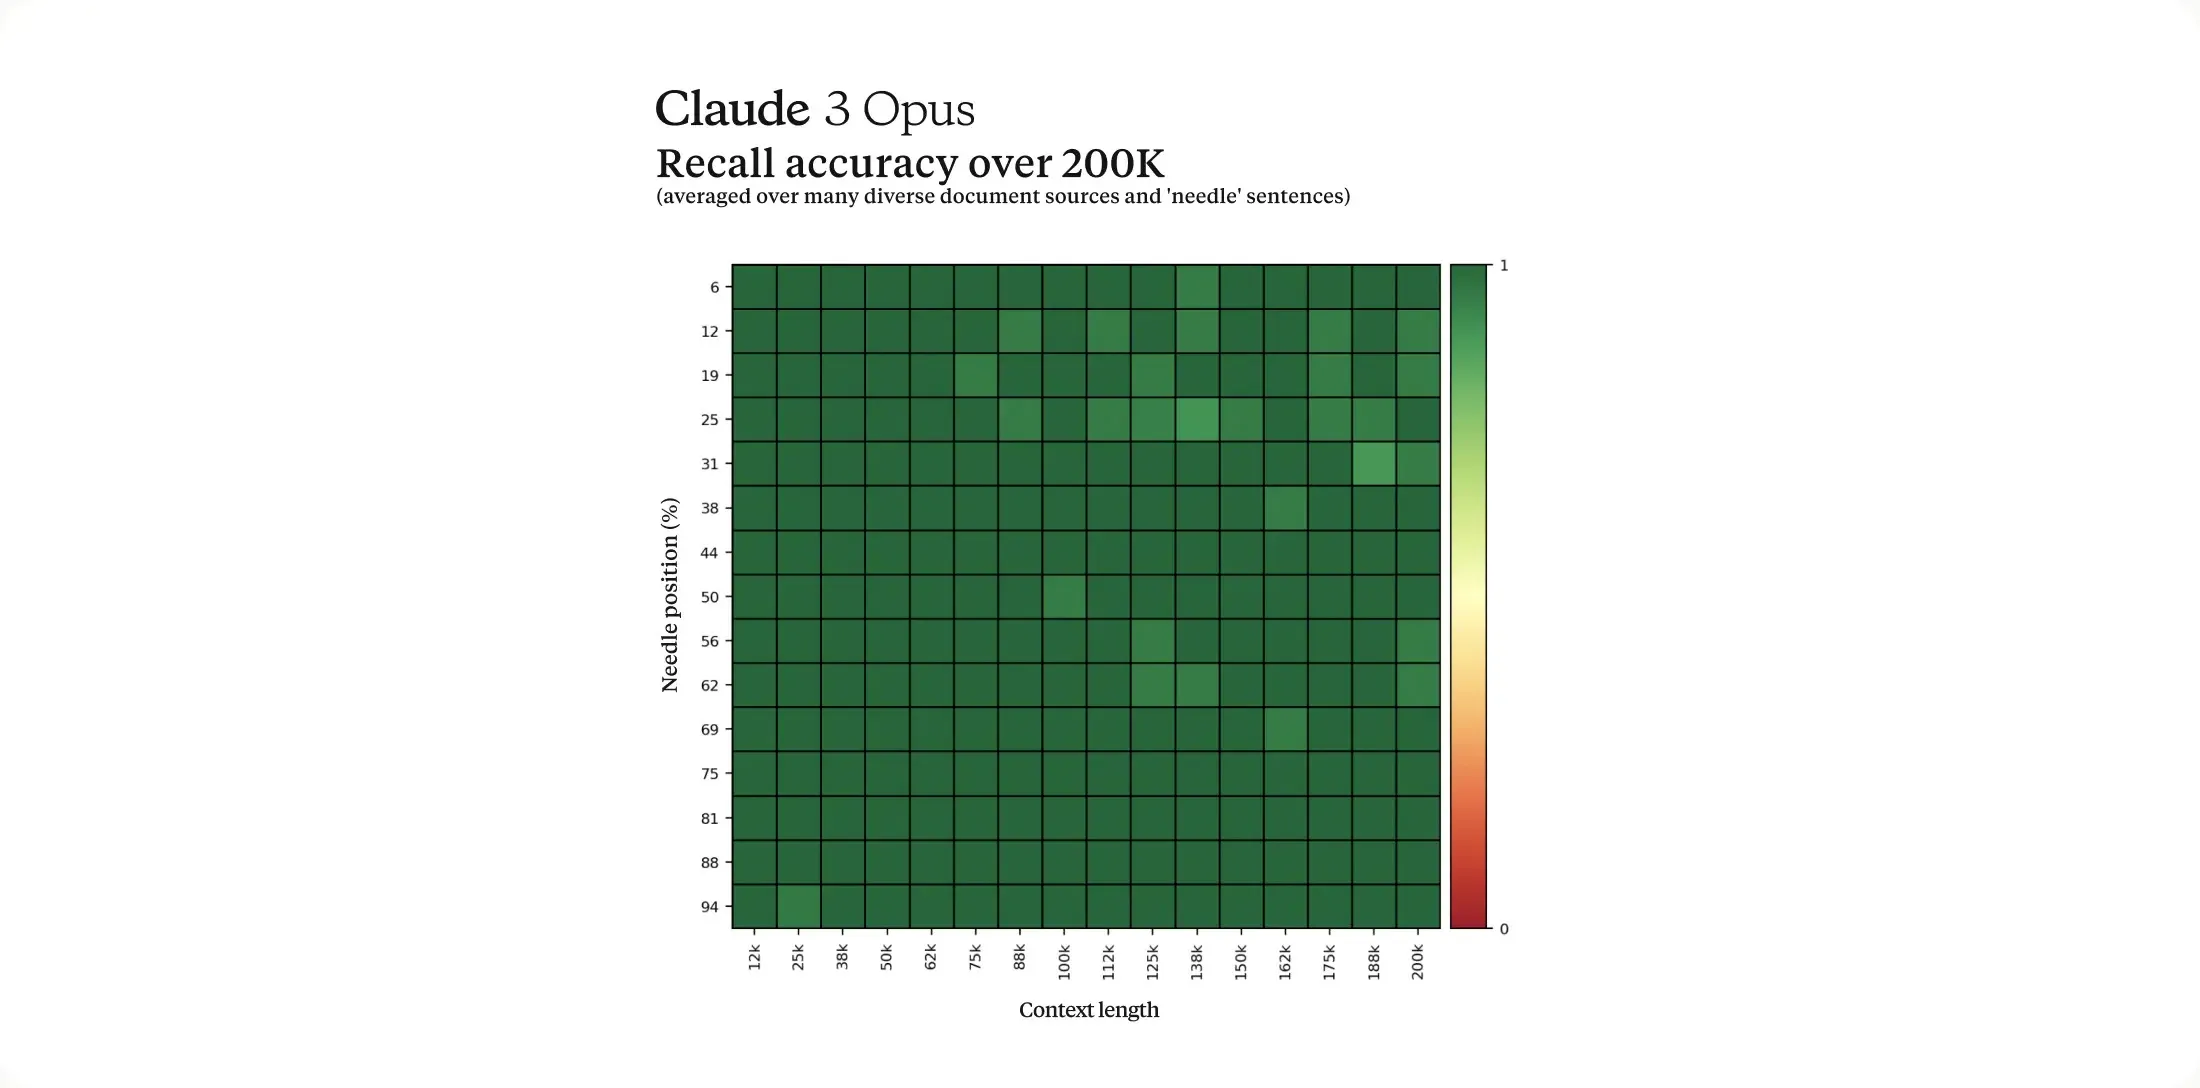 Claude 3 Opus offers a context window of 200,000 and can be expanded to up to 1 million tokens.